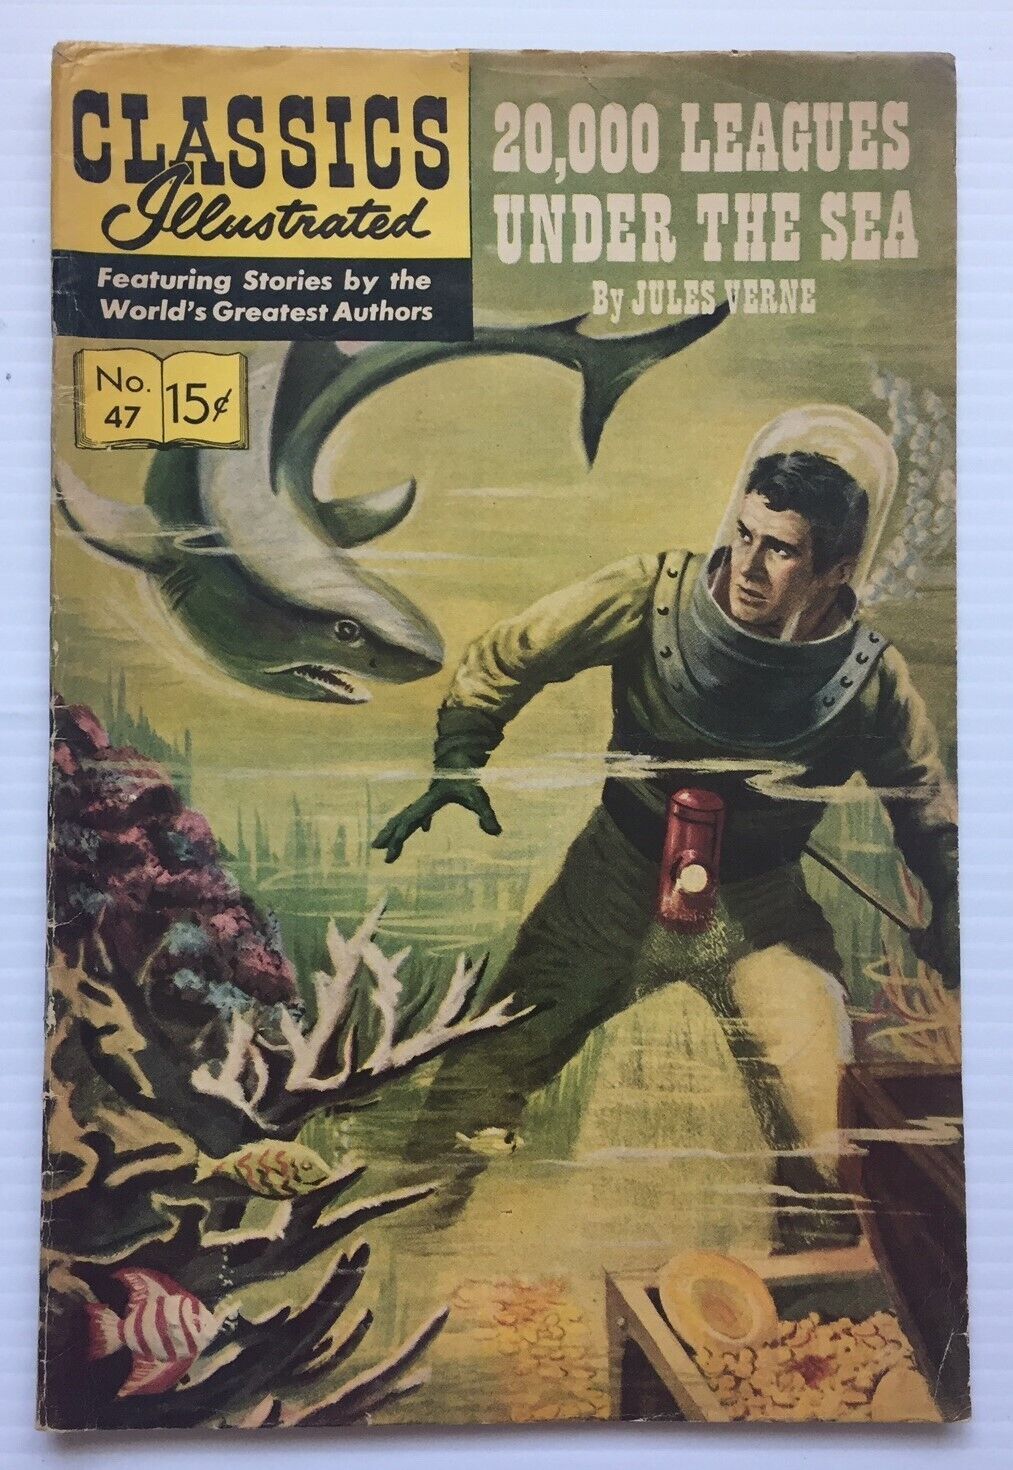 CLASSICS ILLUSTRATED #47 (1964) 20,000 LEAGUES UNDER THE SEA by Jules Verne